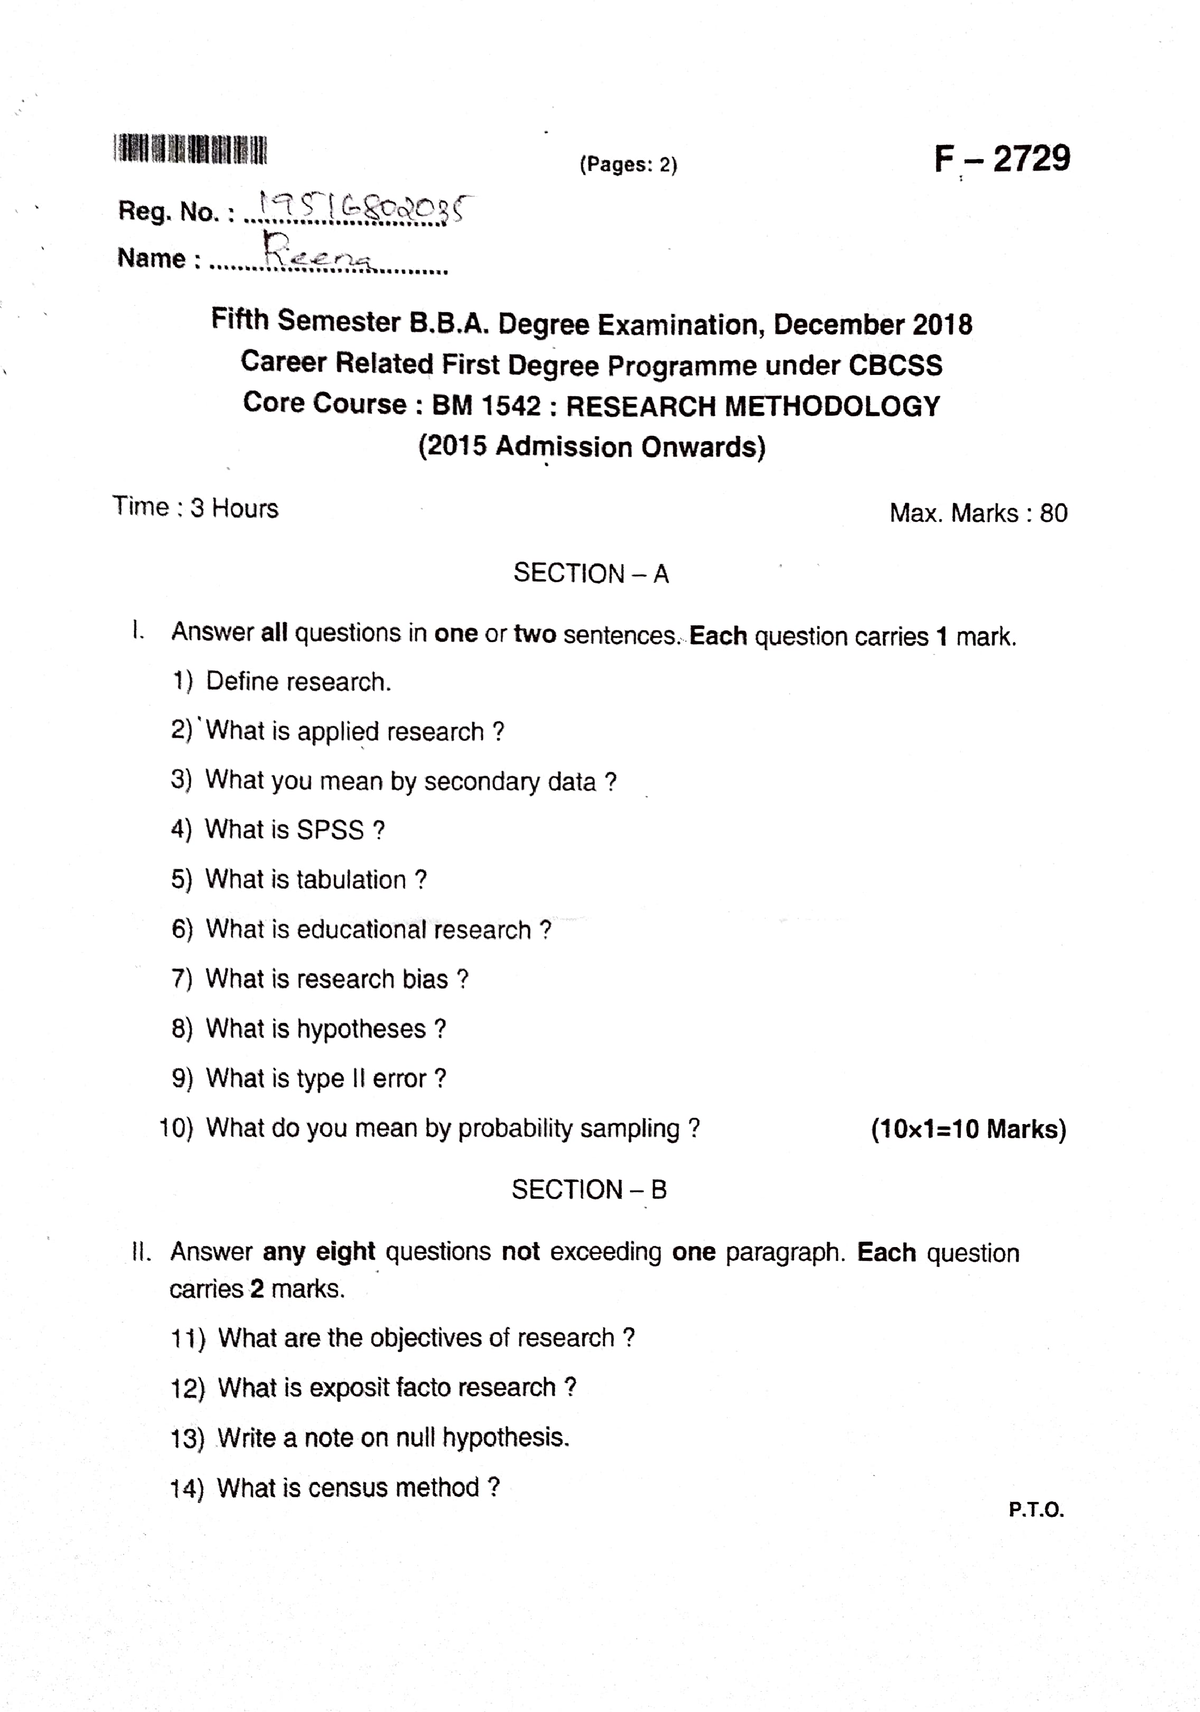 phd question paper on research methodology